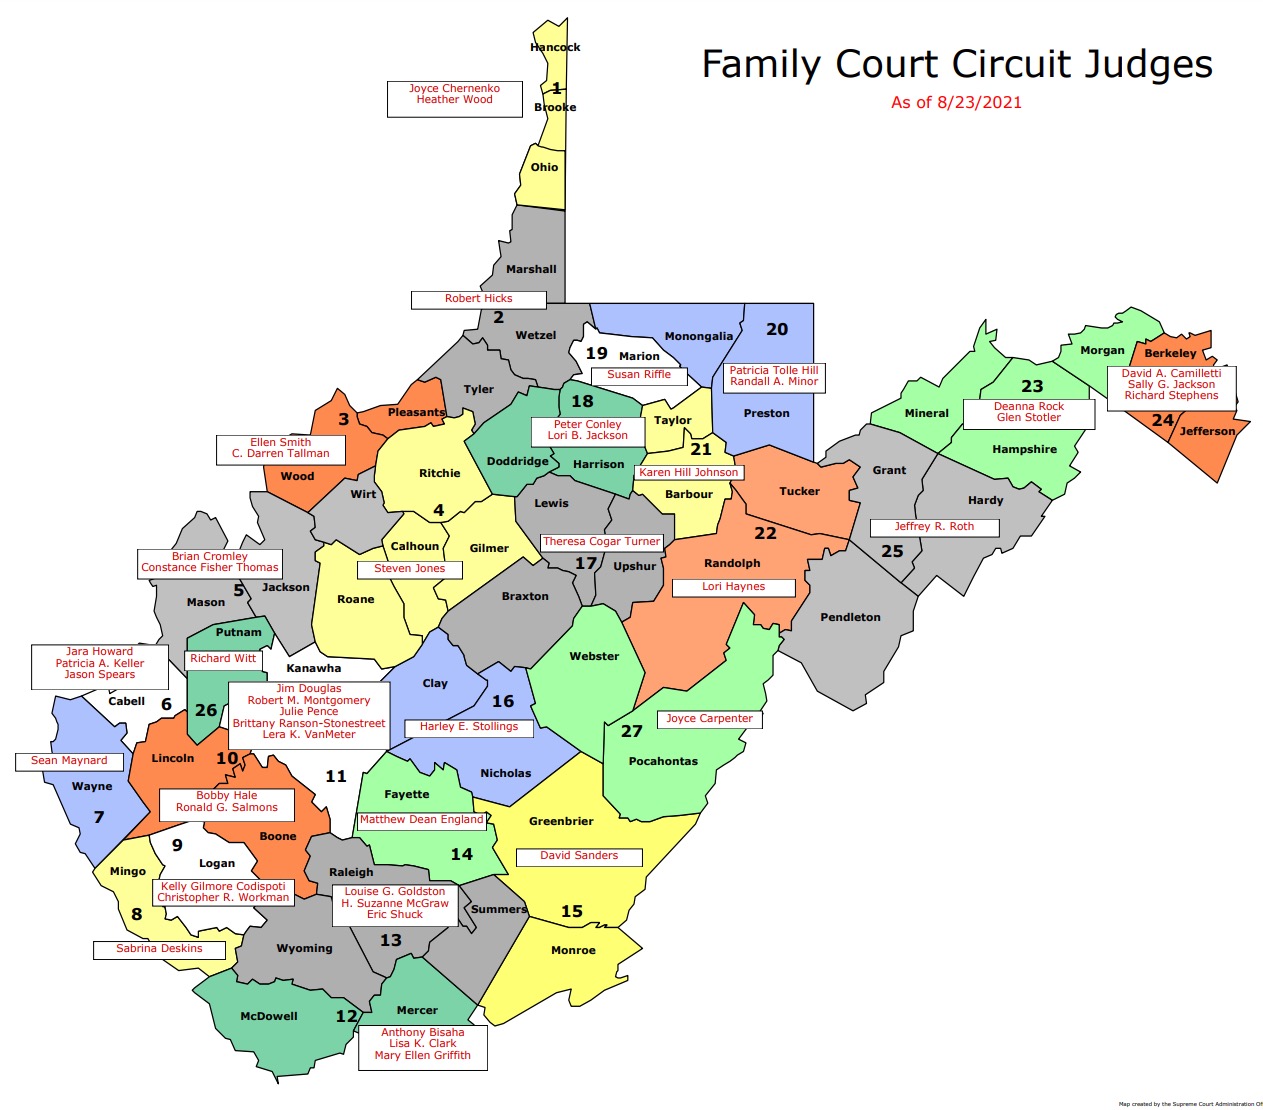 Map of West Virginia Family Court districts with judges